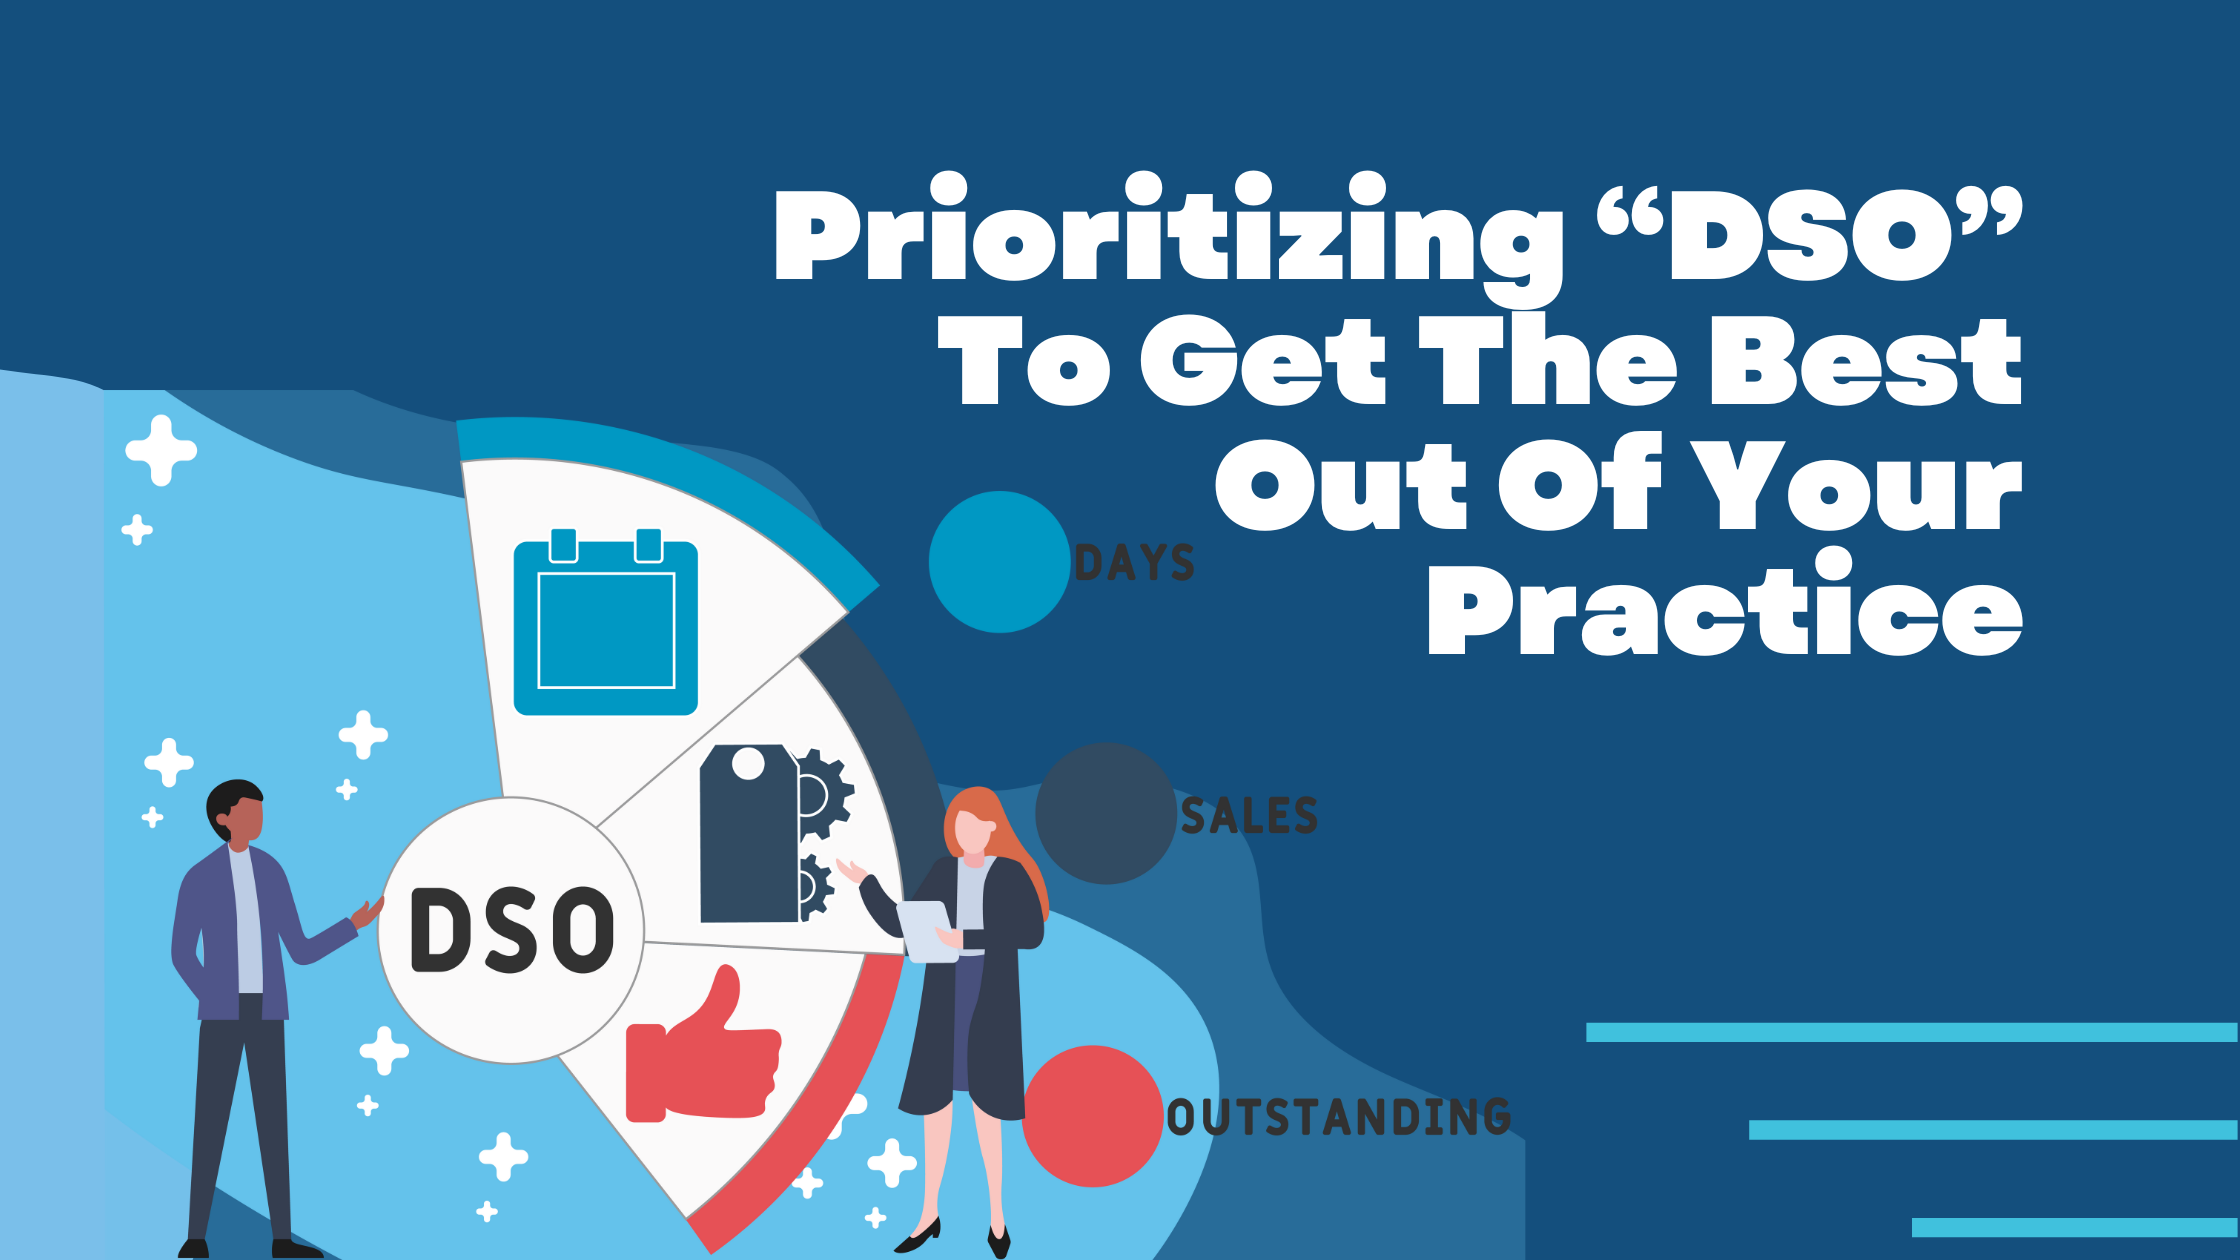 Prioritizing “Days Sales Outstanding” To Get The Best Out Of Your Practice